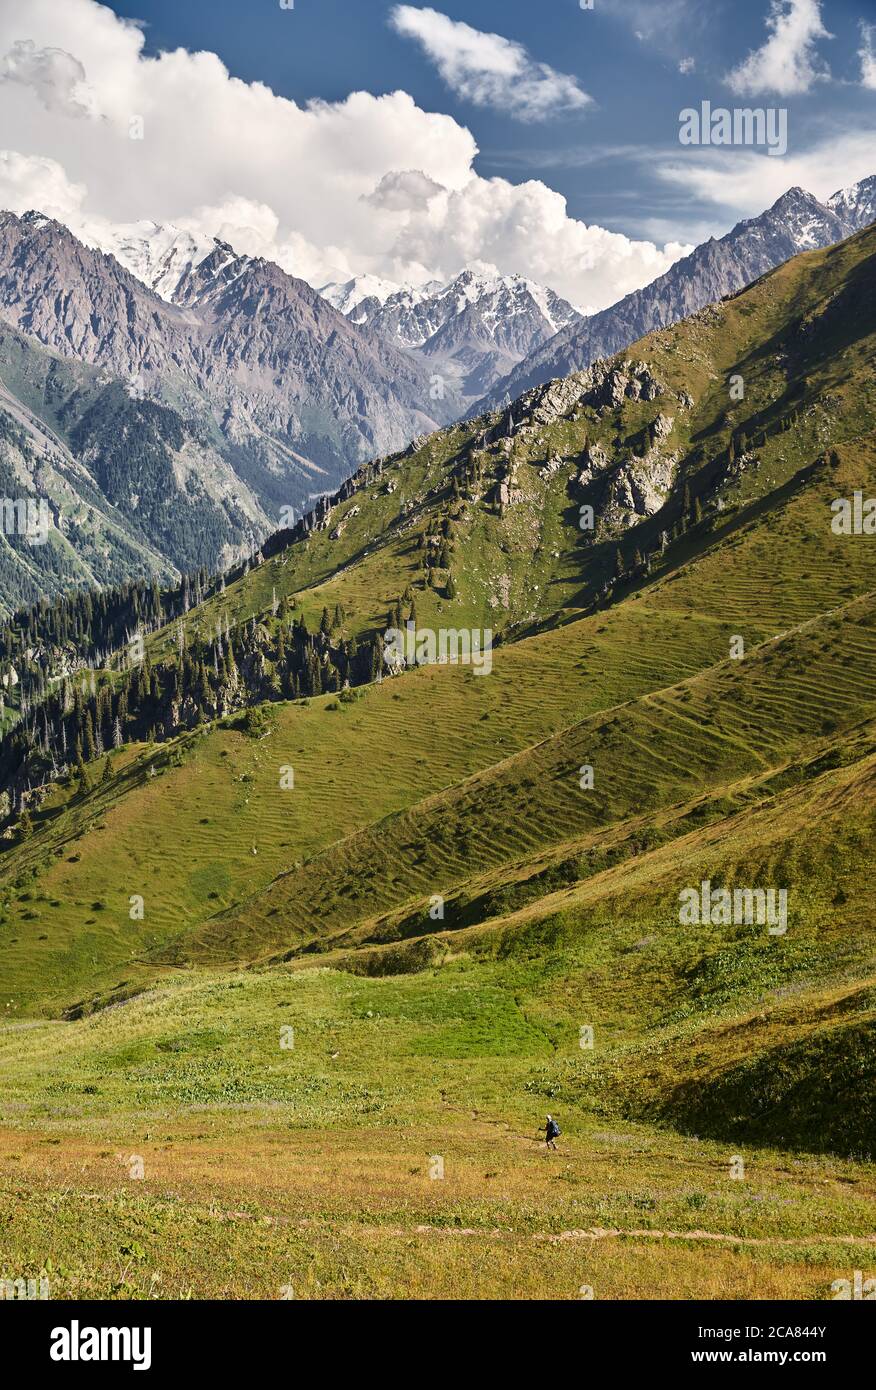 Small tourist walking on green hill in the mountain valley with high snowy peaks Stock Photo